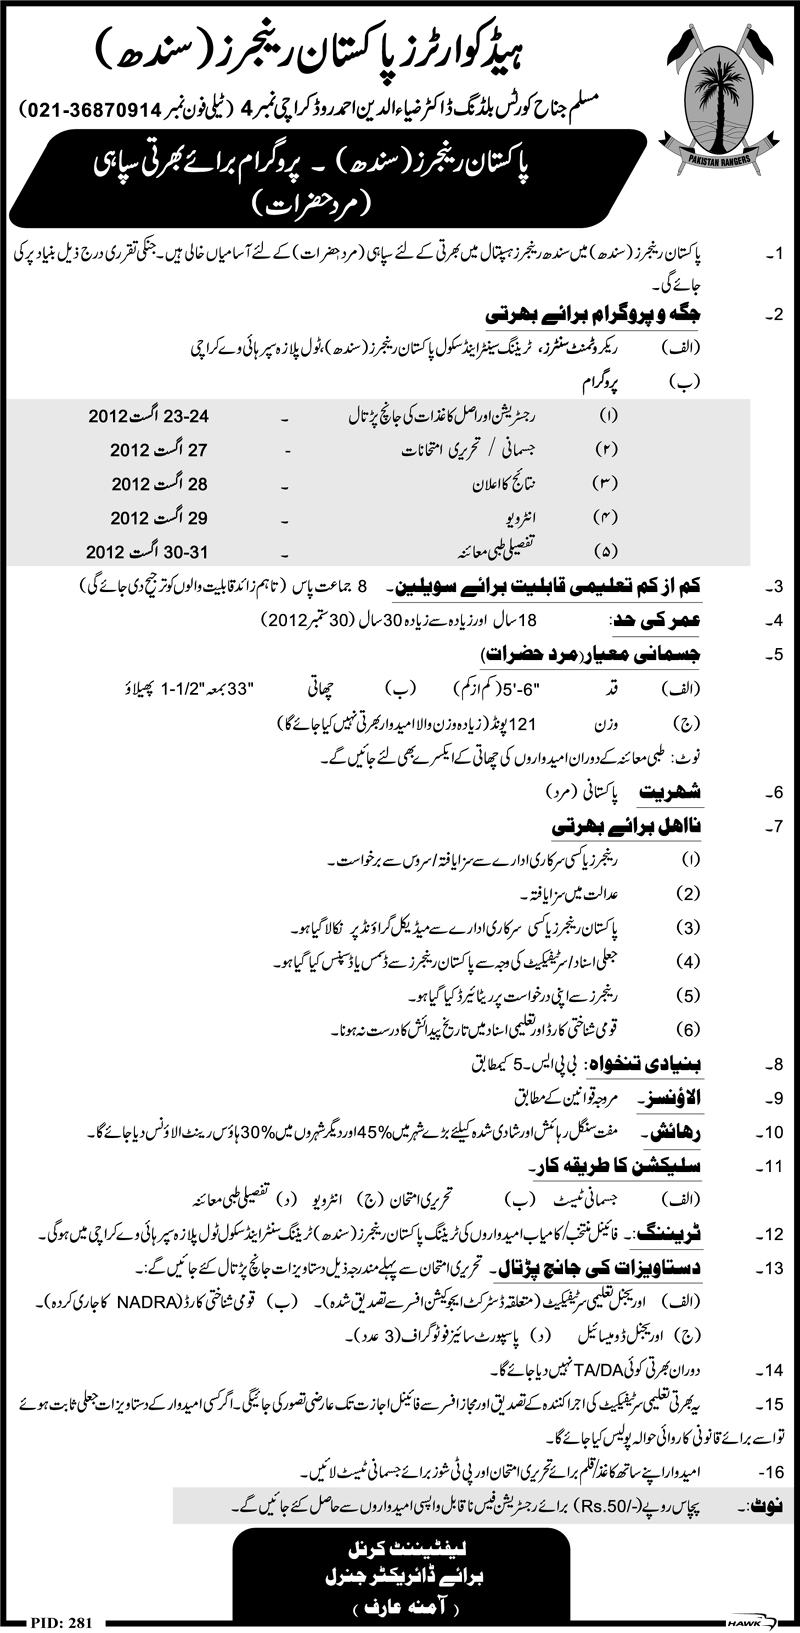 Join Pakistan Rangers Sindh as Constable (Sepoy) (Government Job)